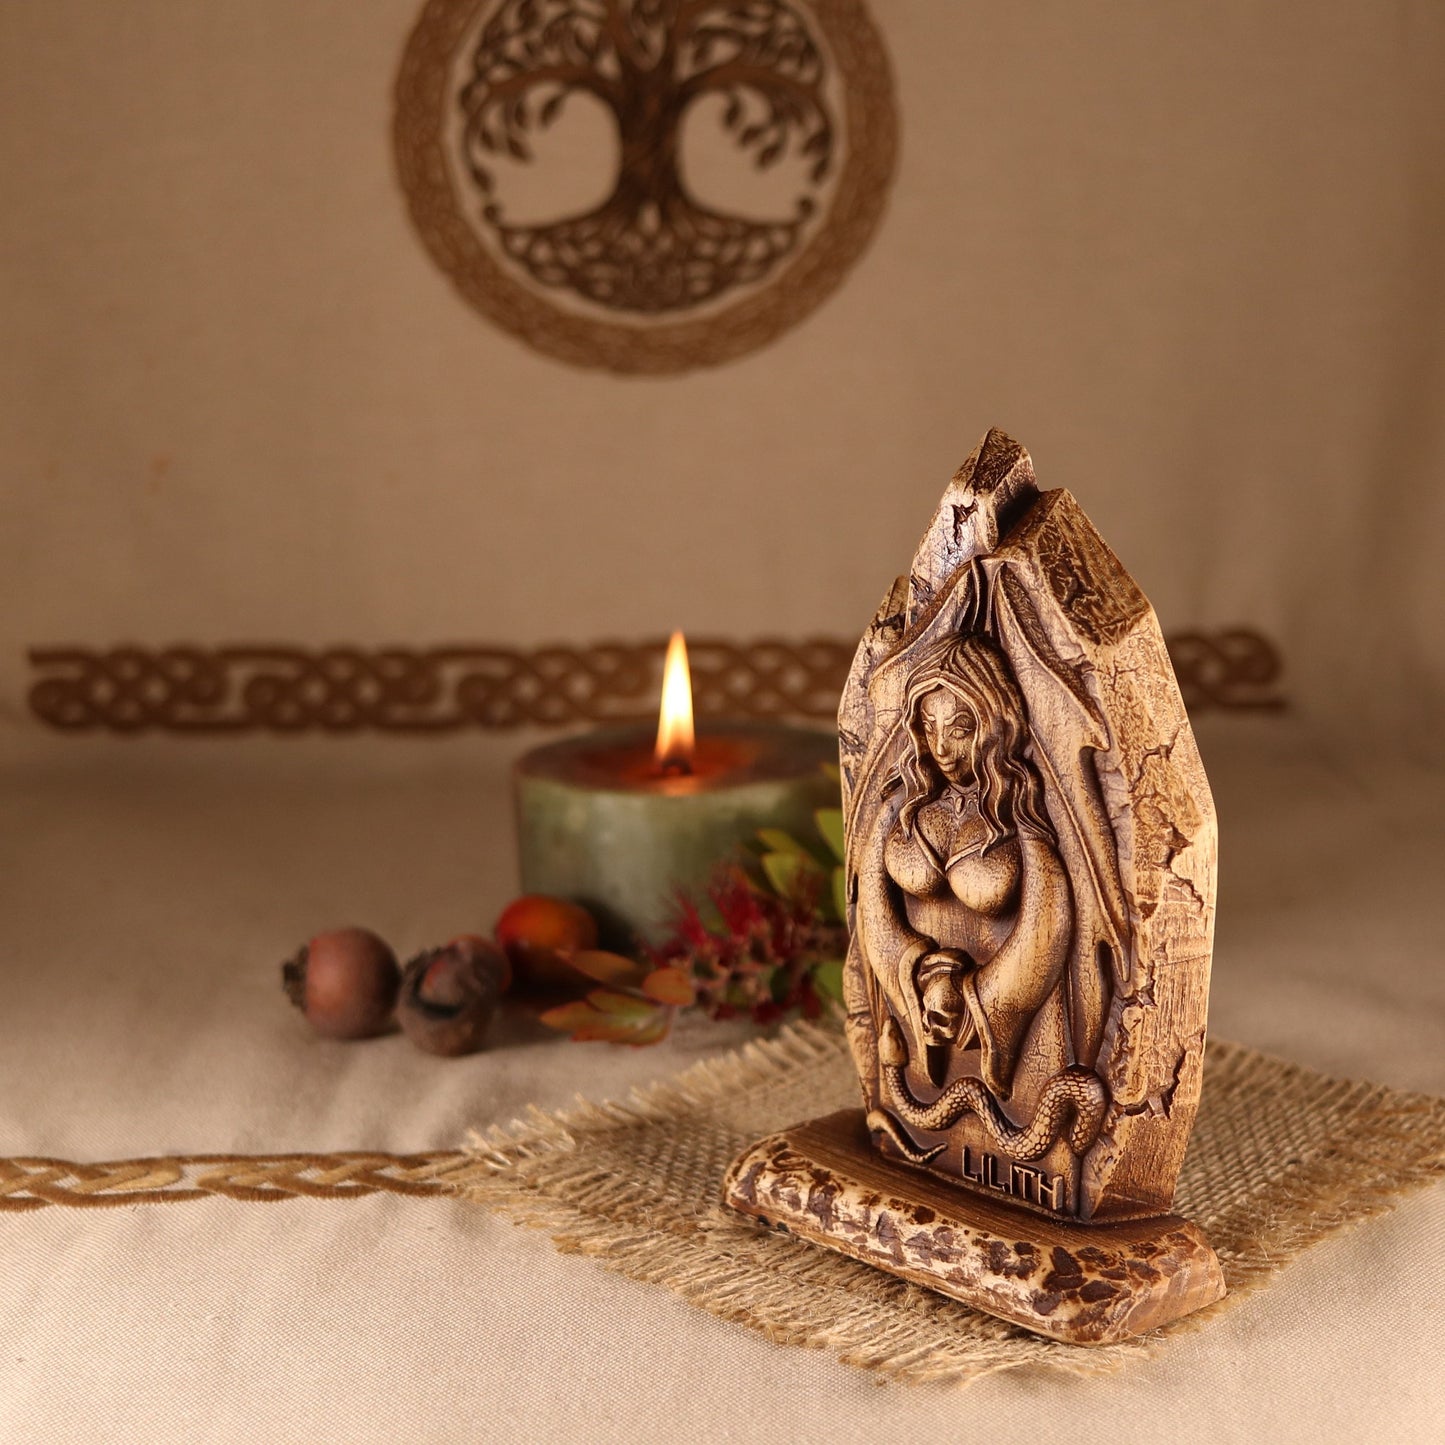 Lilith statue, Wiccan mini altar, Goddess statue, Wood carving